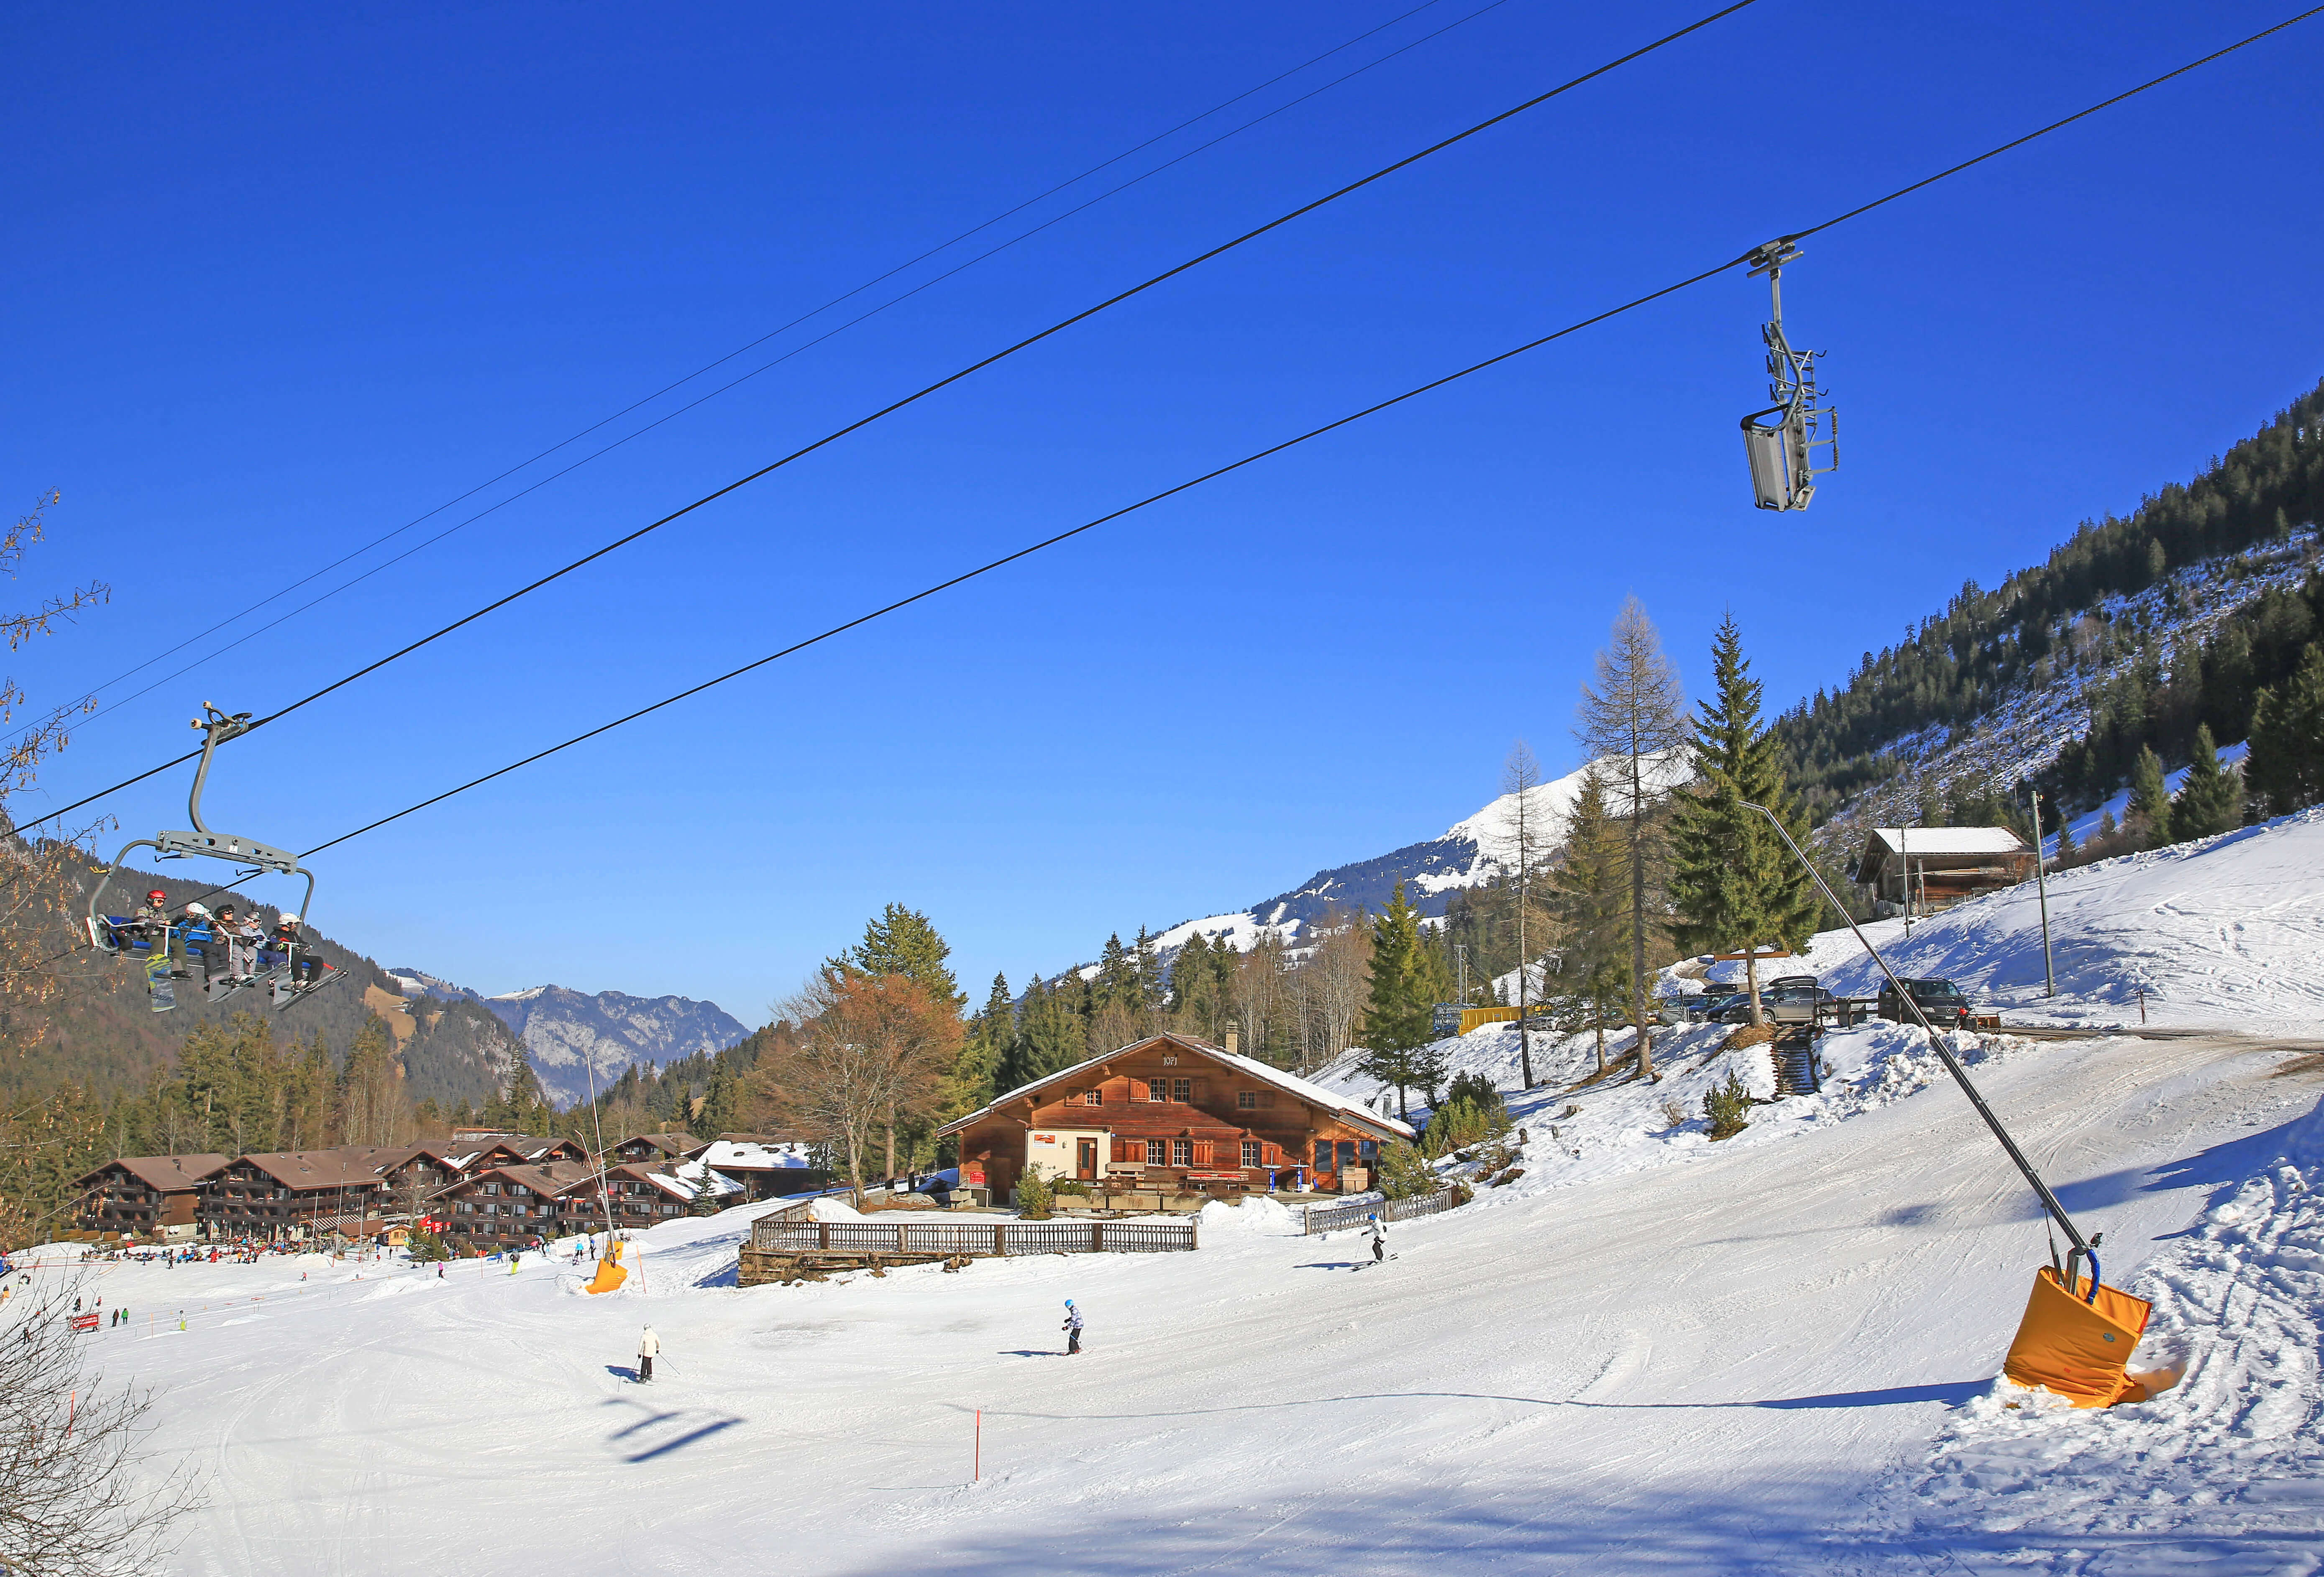 Exterior view in winter with chairlift